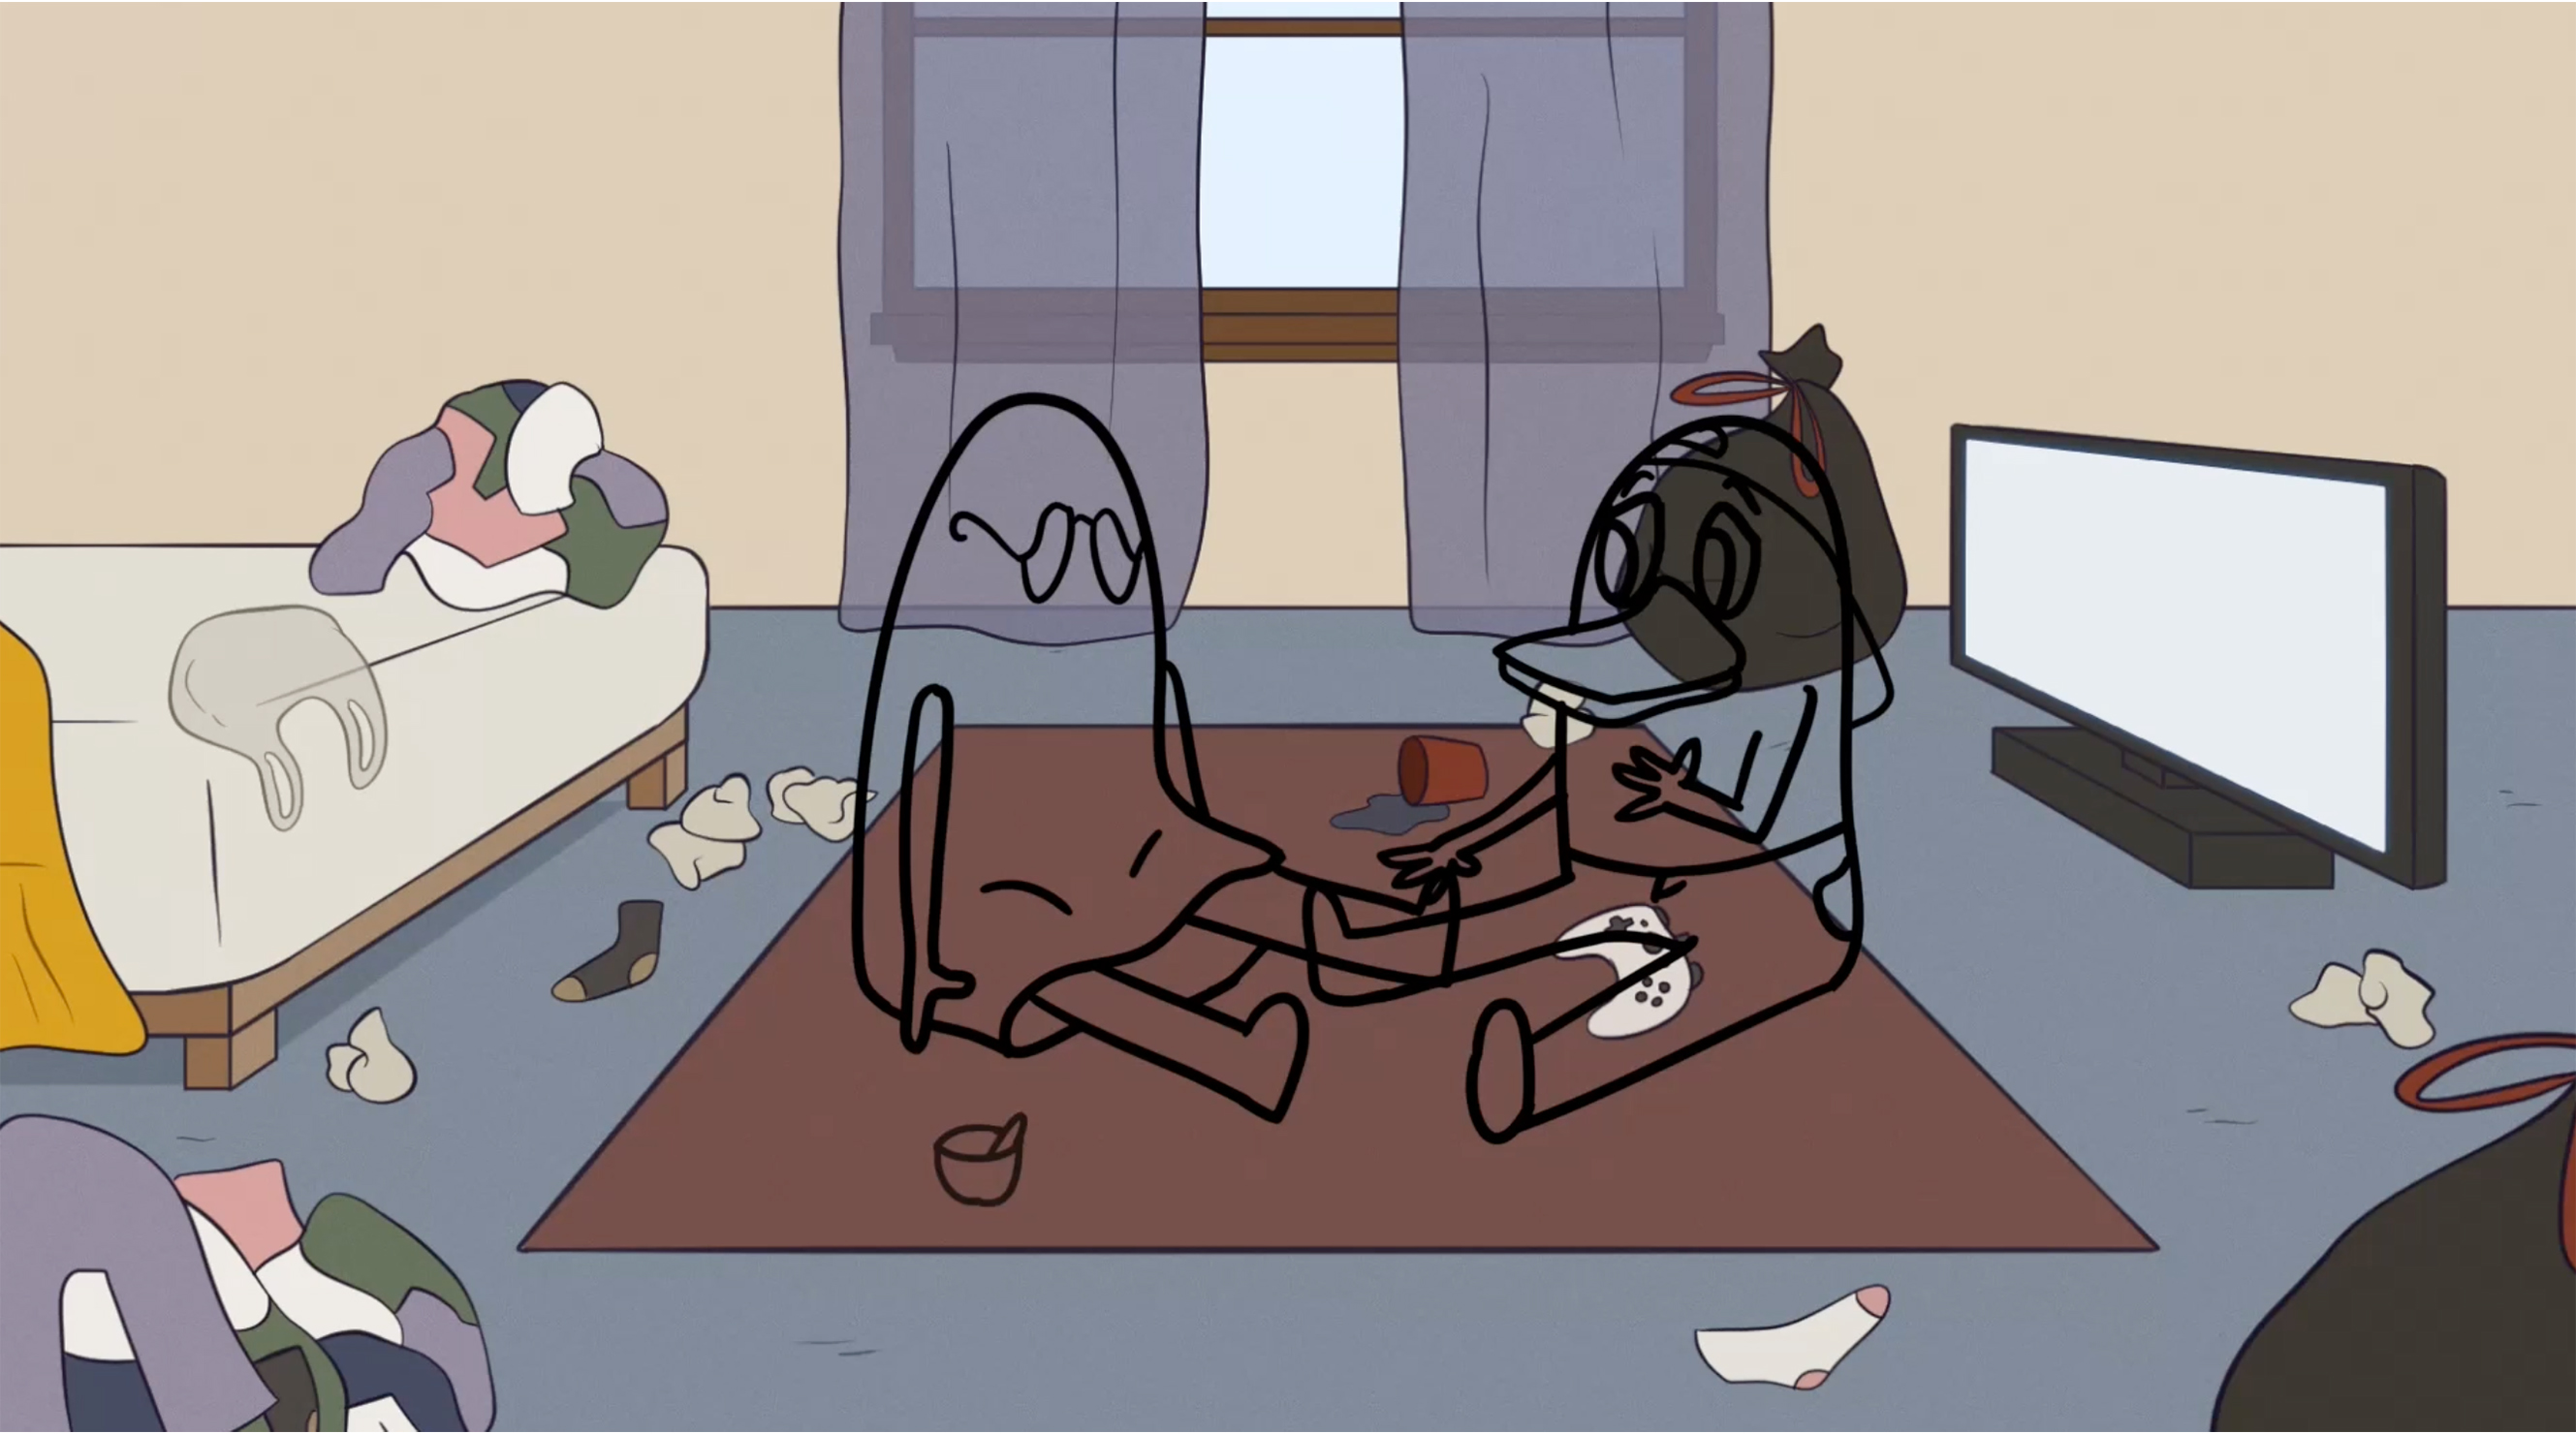  / Still of characters Ghosty and Duck from "Roommates," a 2-minute short animation created using Photoshop and ToonBoom, rendered in Media Encoder. (2022)